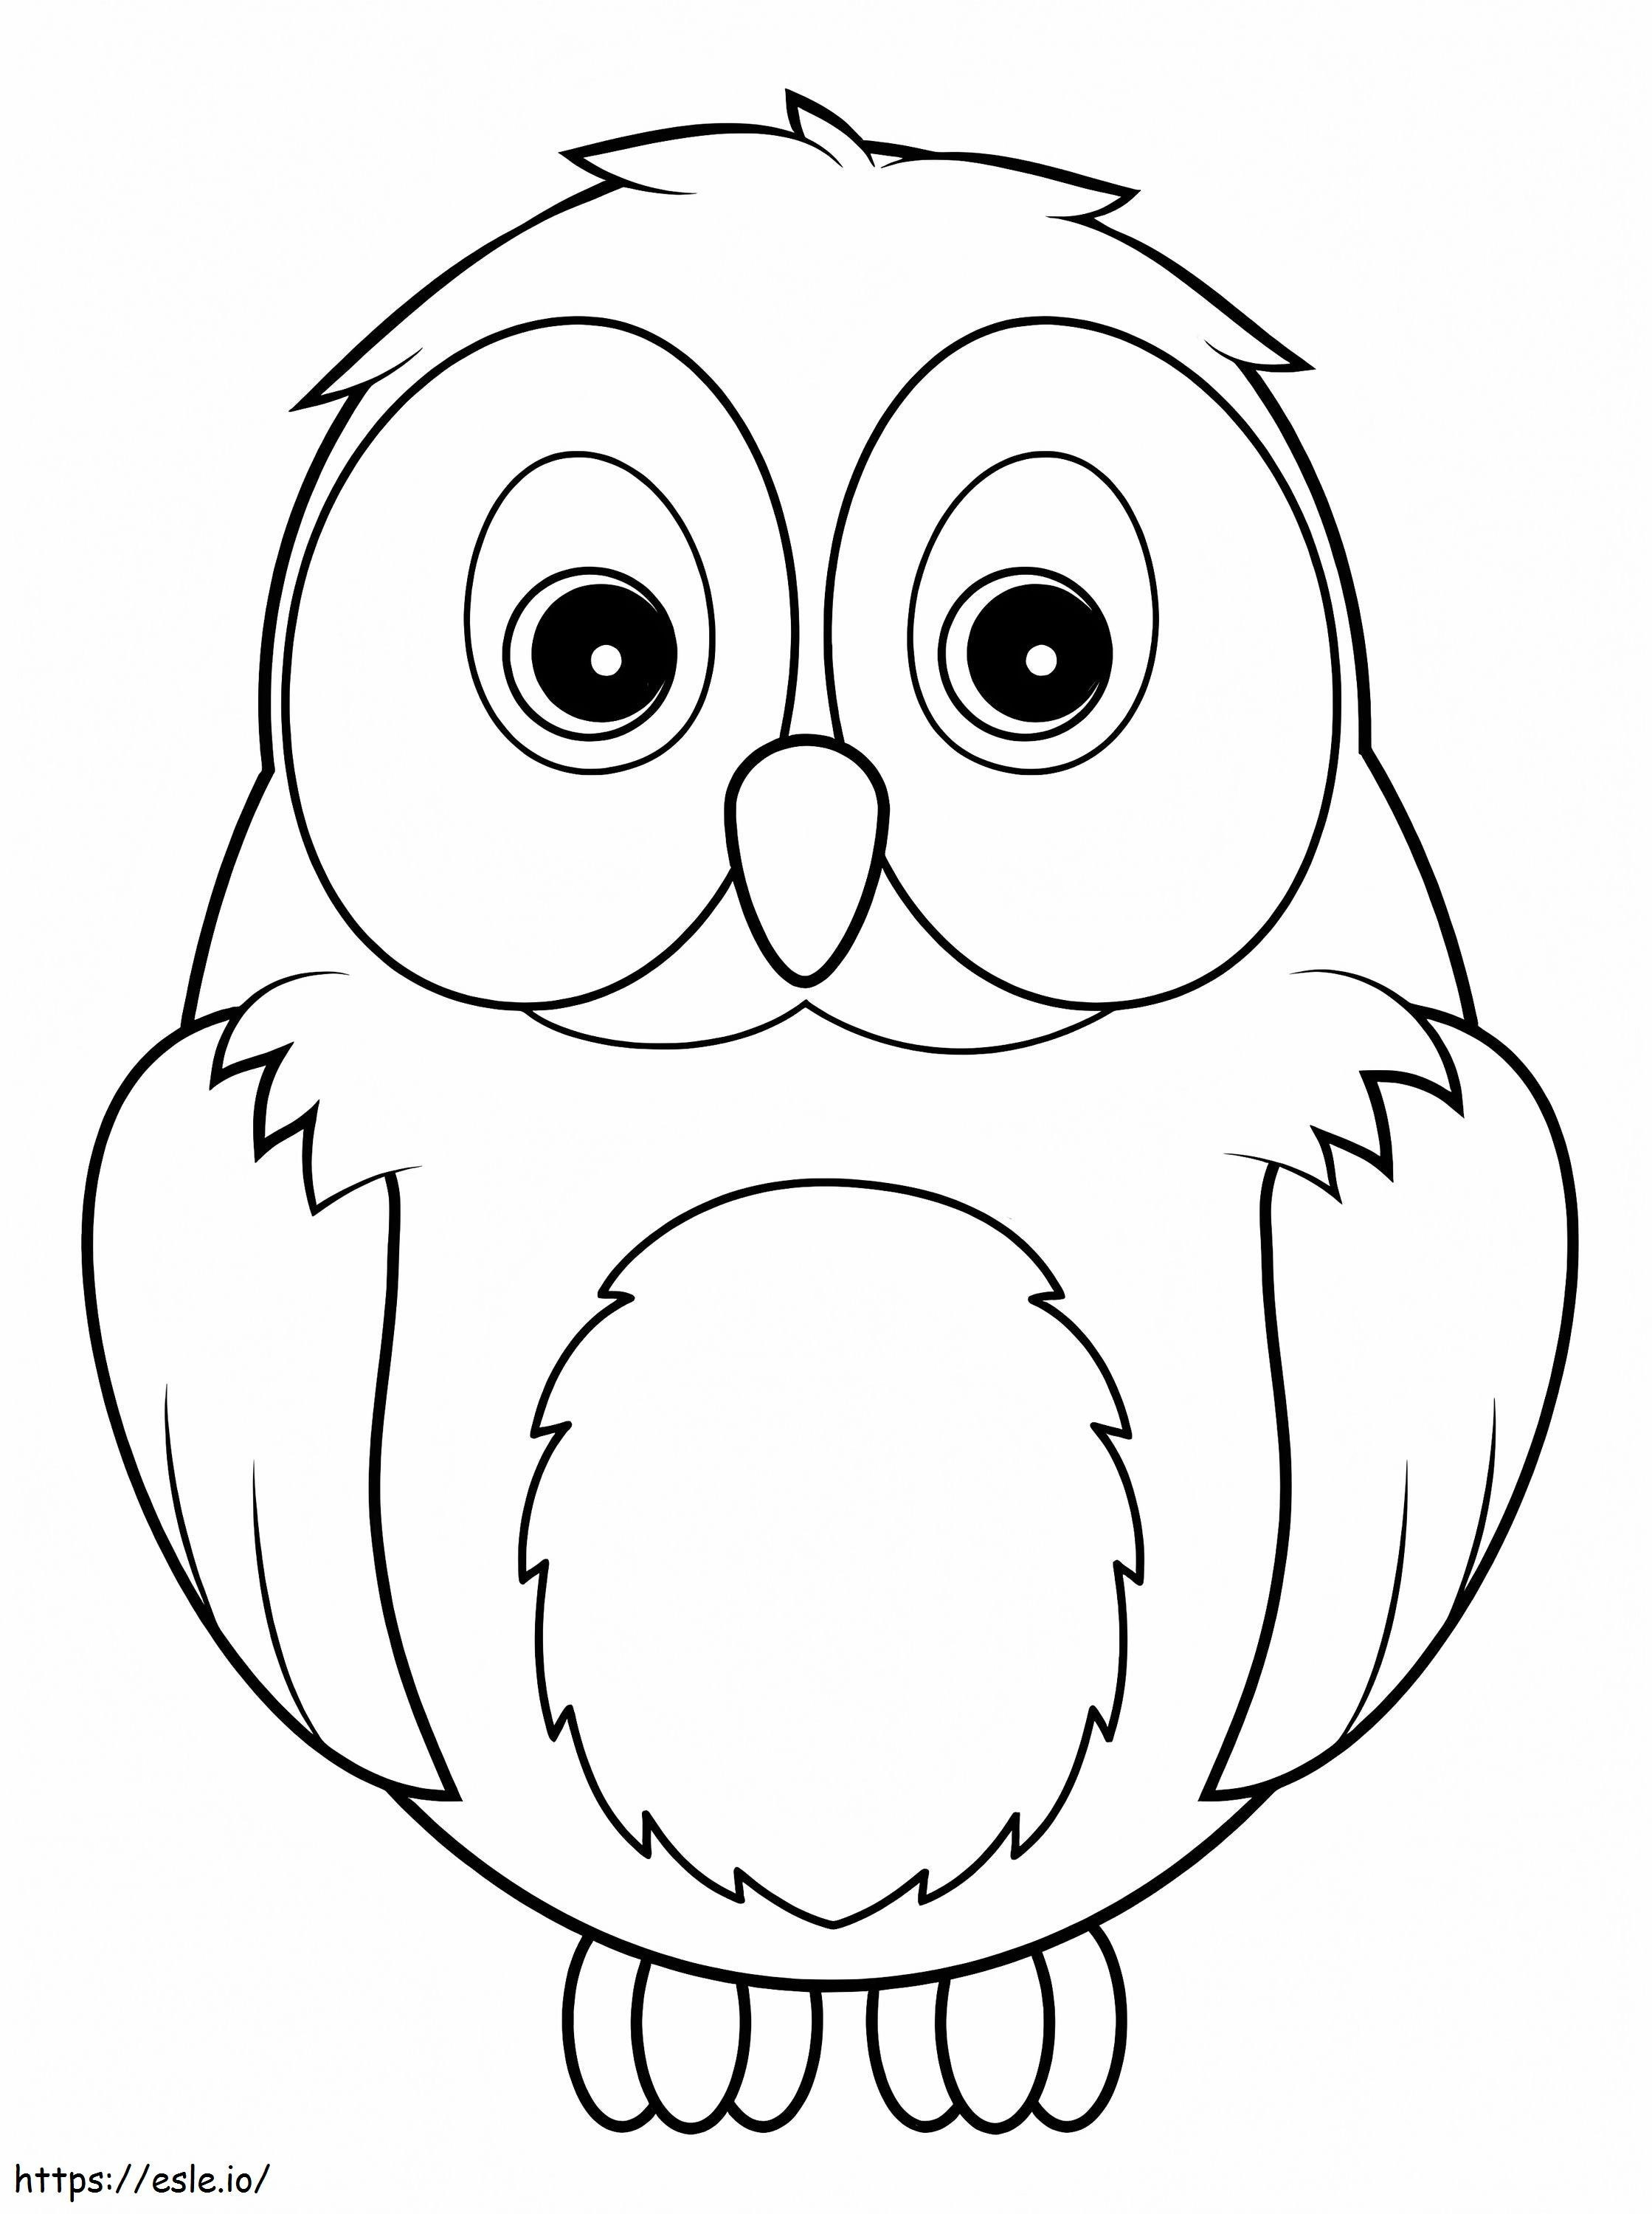 Owl 9 coloring page